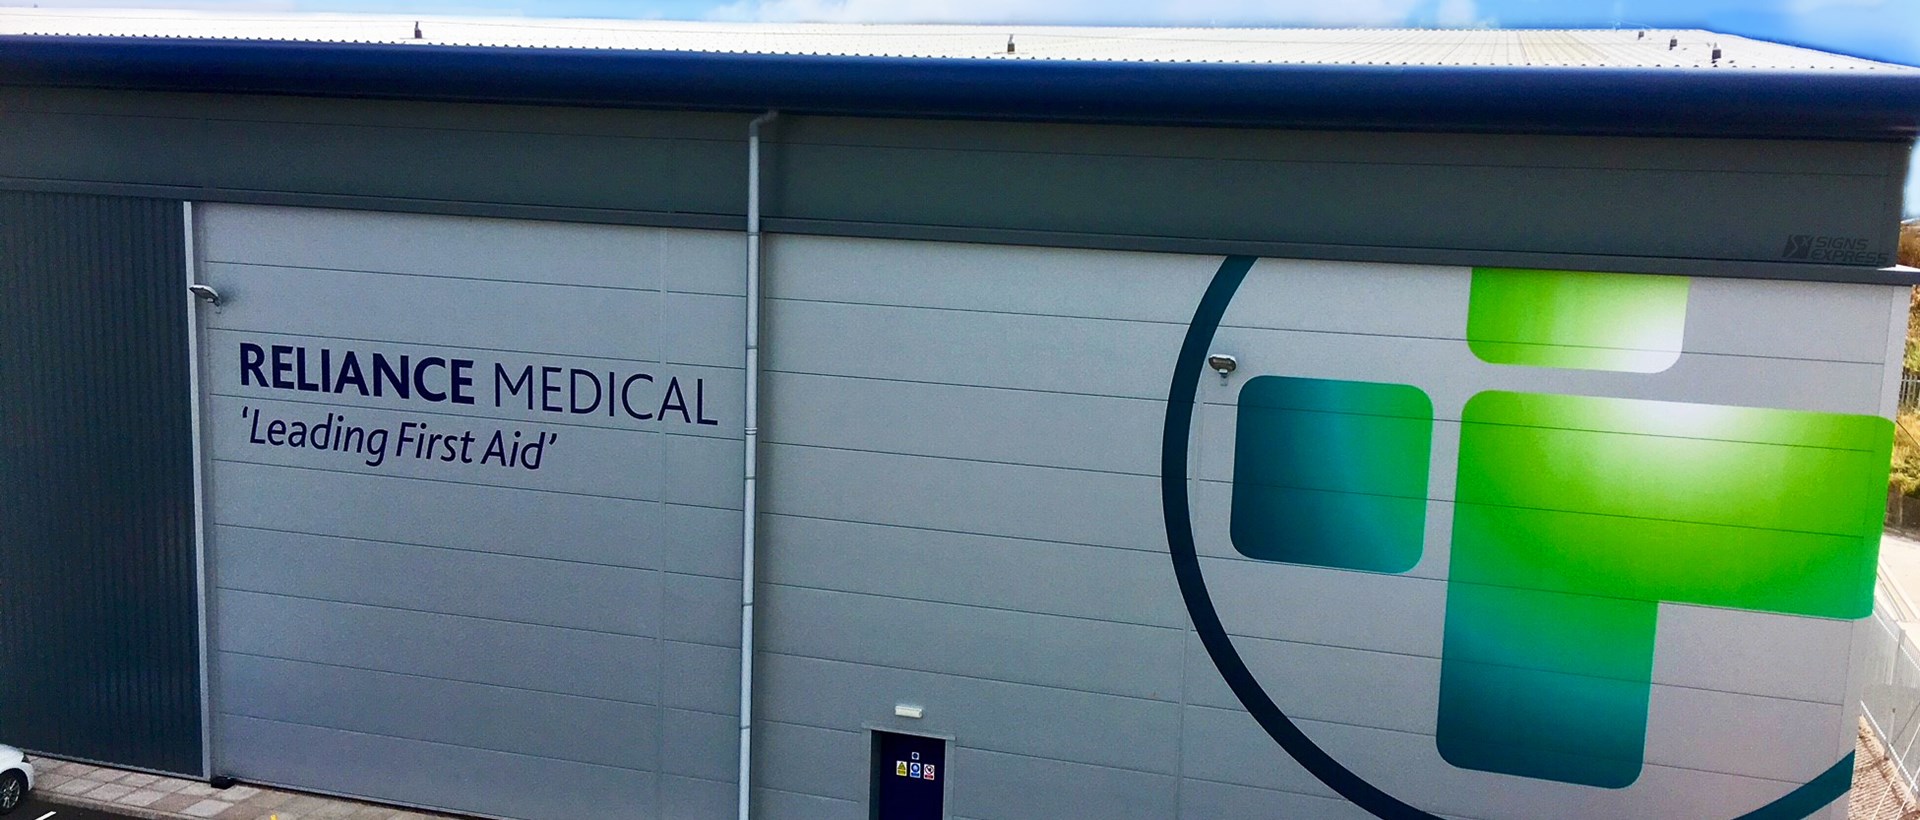 Reliance Medical Signs Express Stoke Building Exterior Graphic Wm